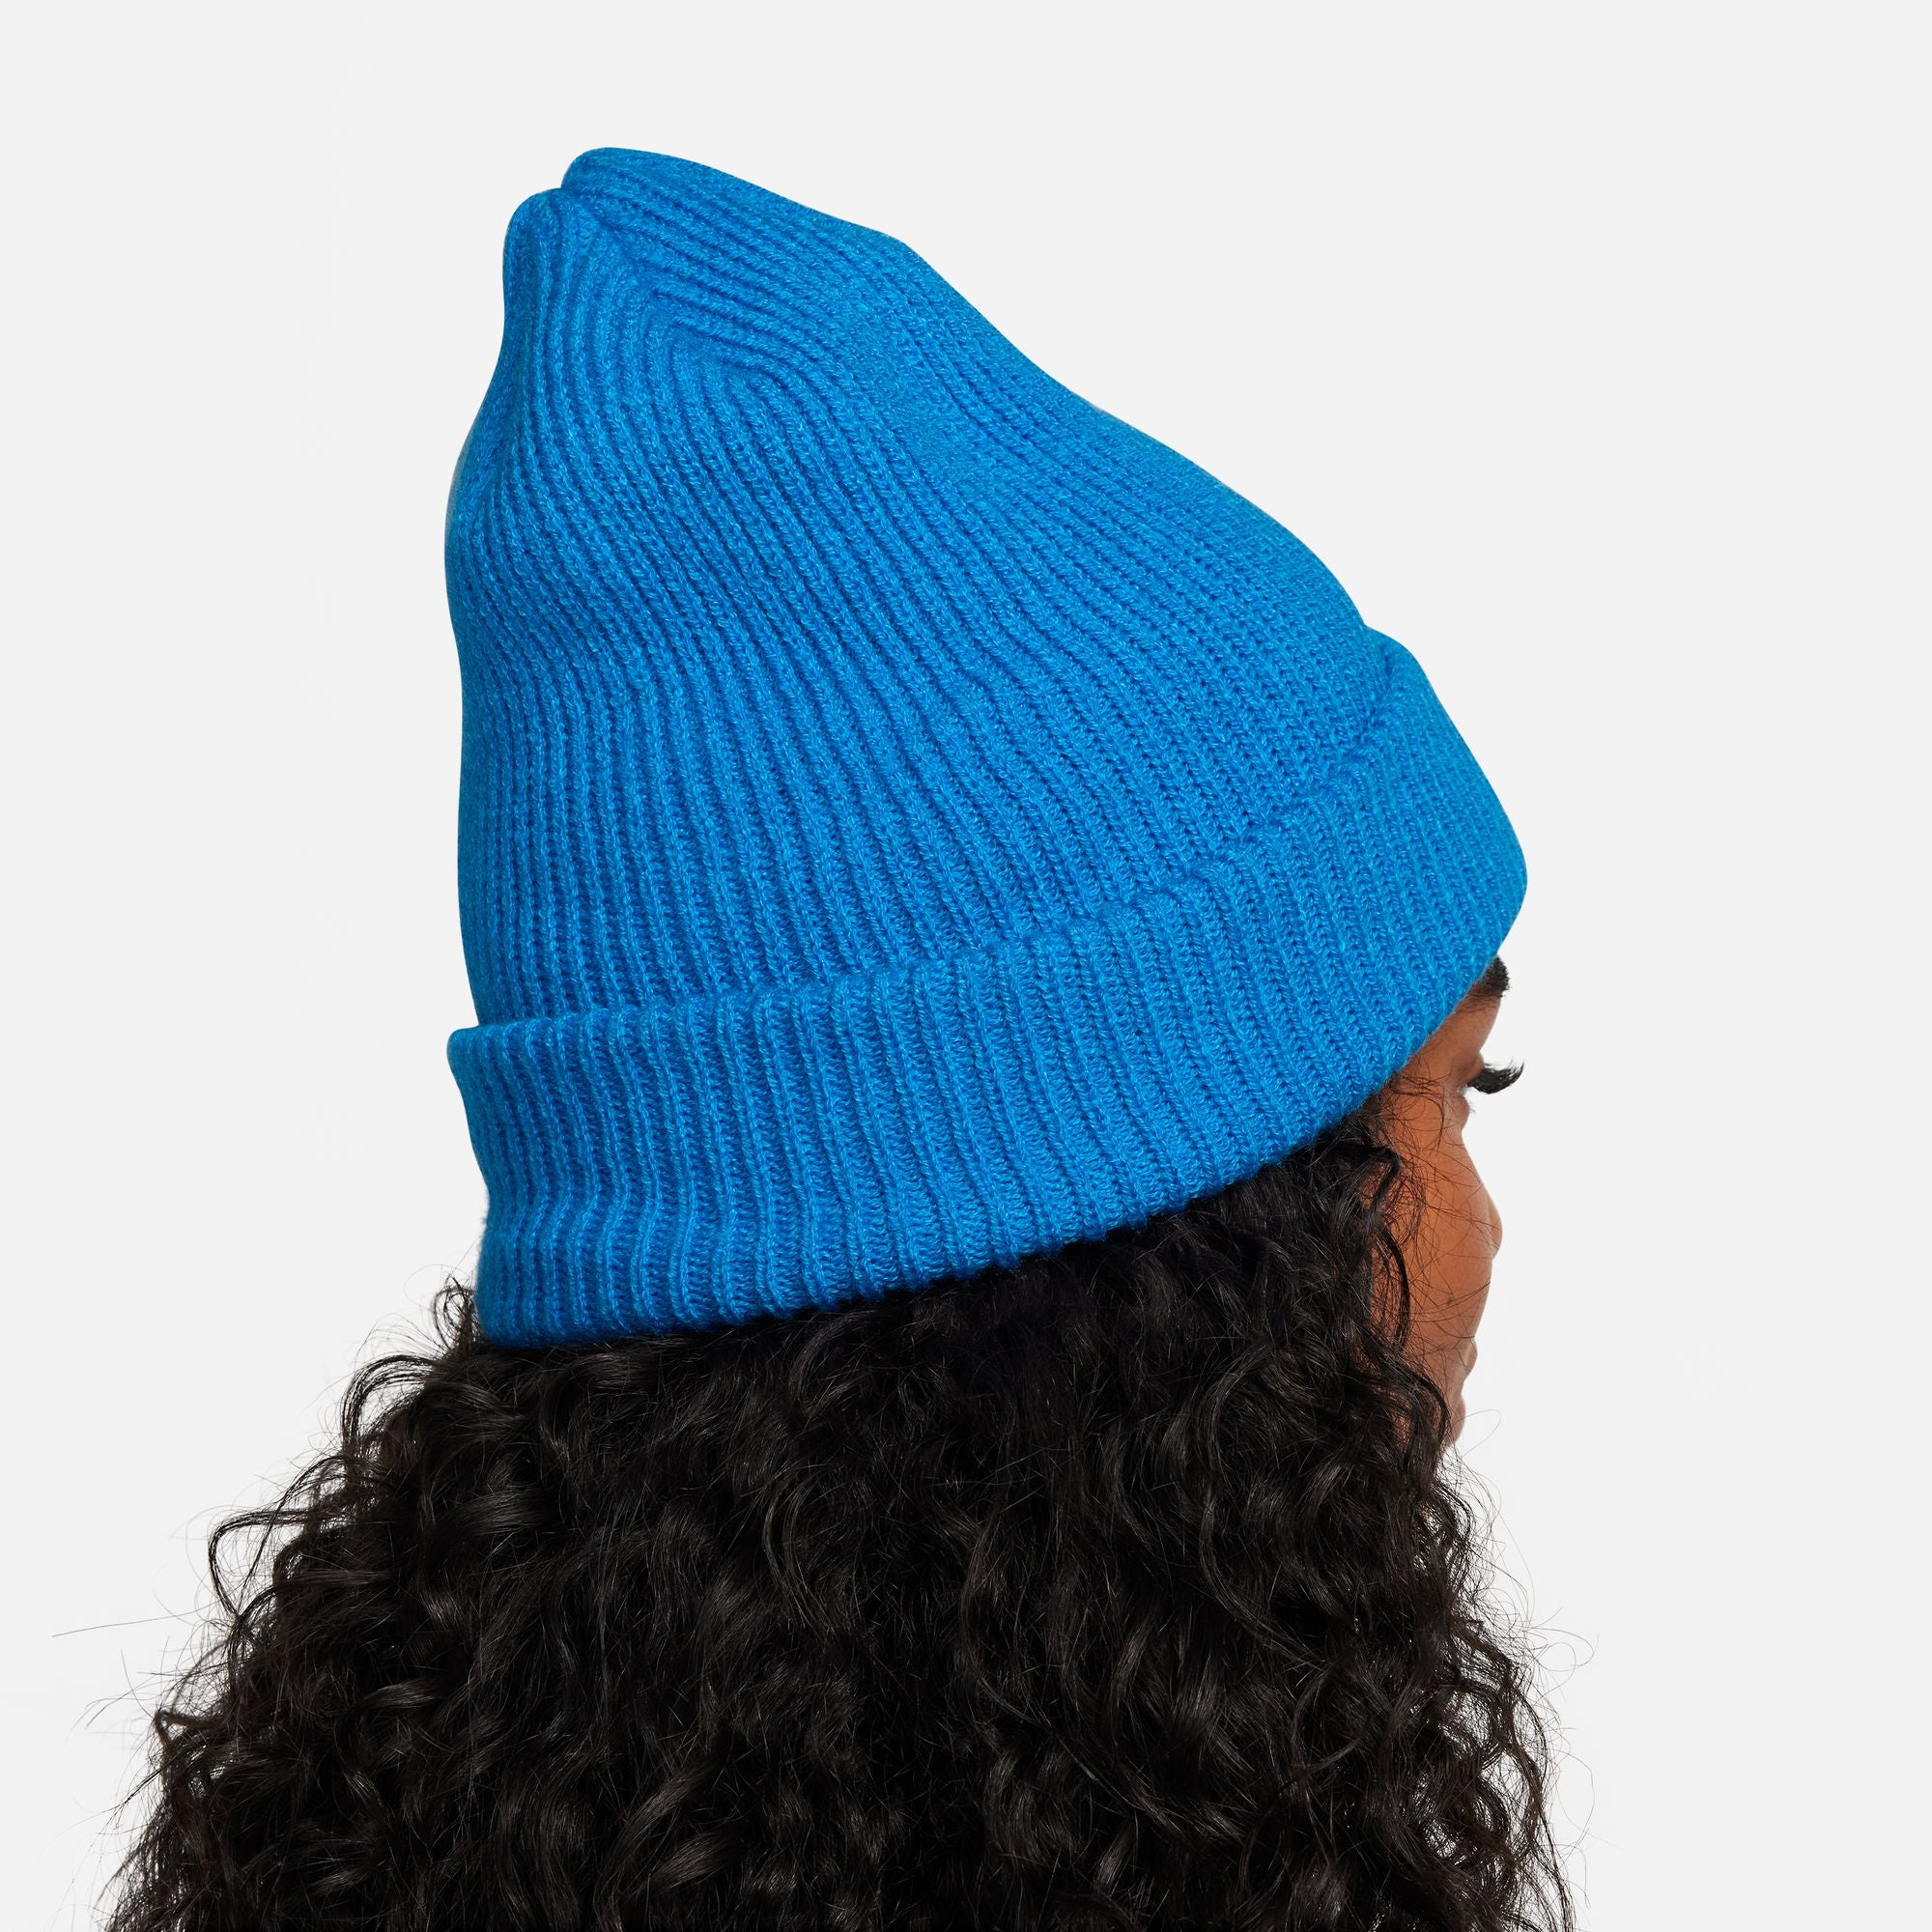 Ocean blue ribbed and cuffed nike beanie with white nike sb swoosh logo tab on front. Free uk shipping over £50